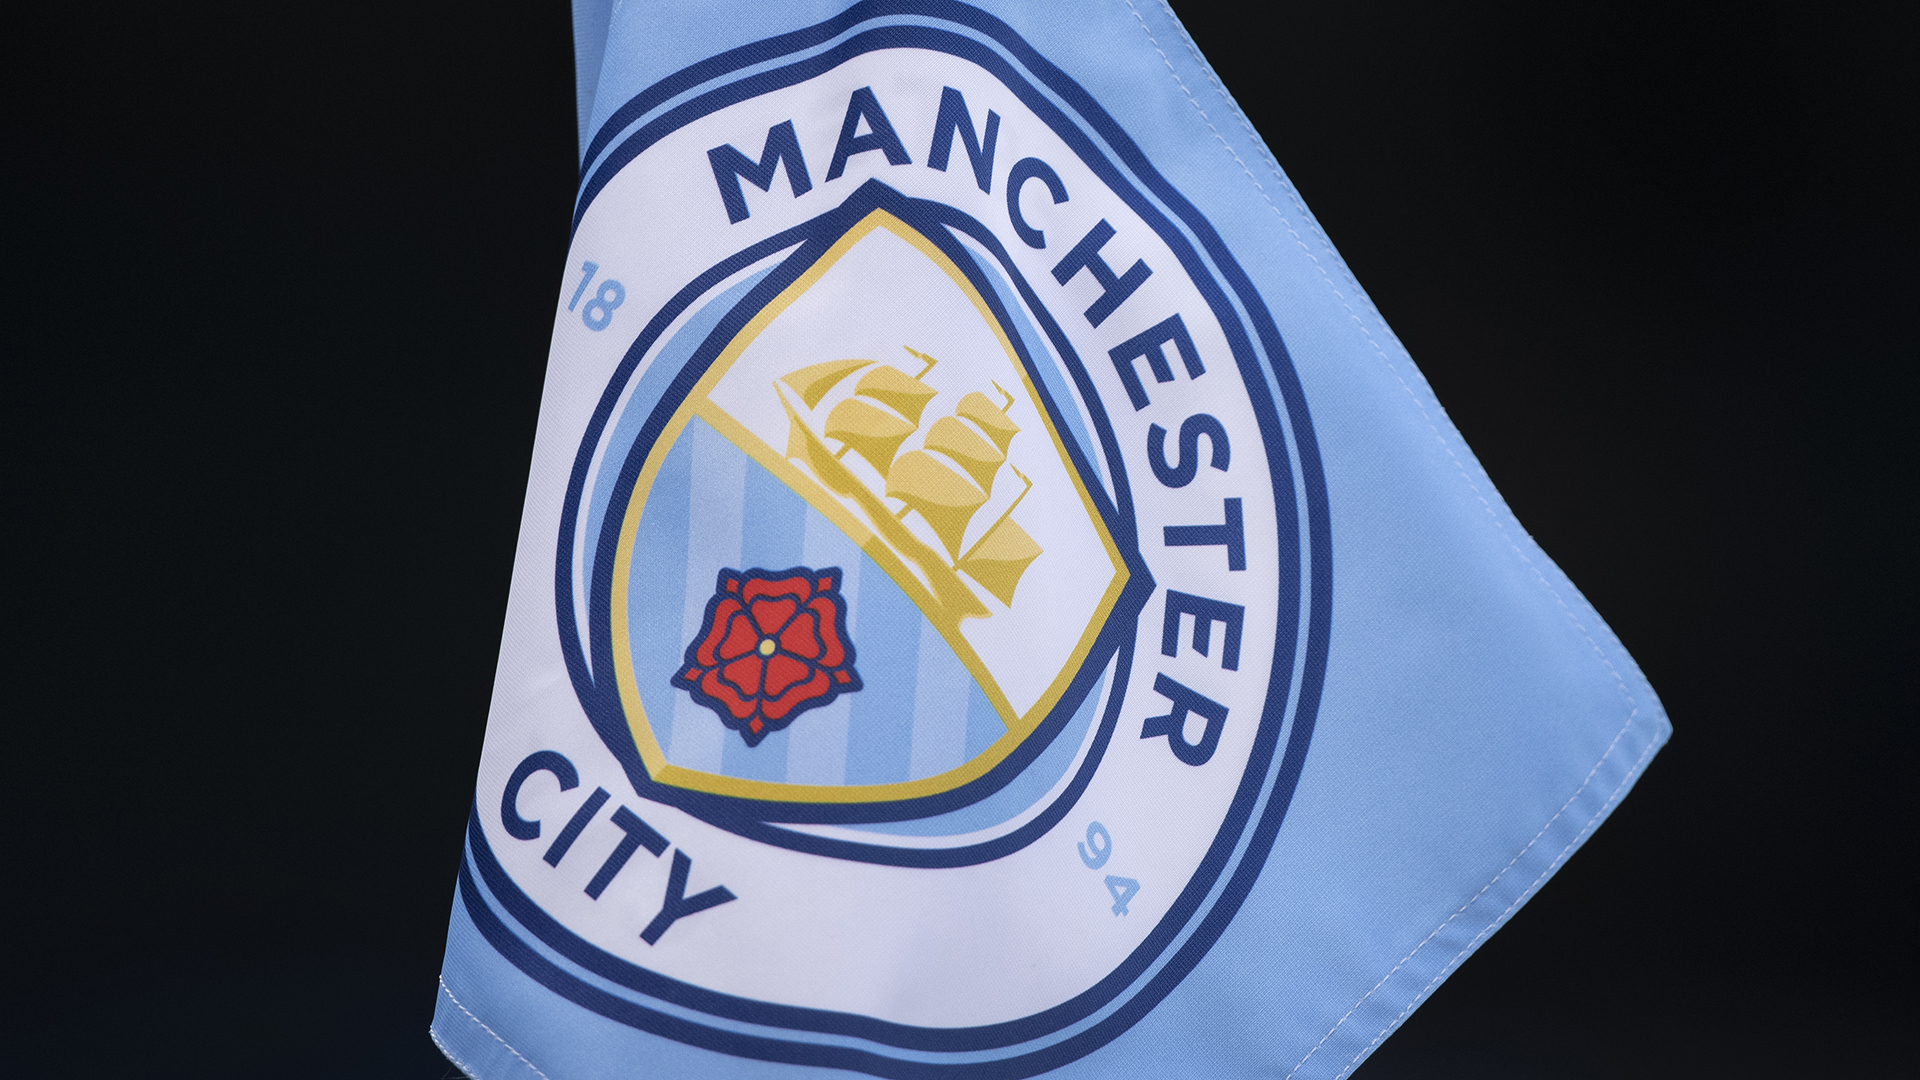 The official Manchester City club badge on a cornerflag ahead of the Premier League match between Manchester City and Everton FC at Etihad Stadium on December 31, 2022 in Manchester, United Kingdom.